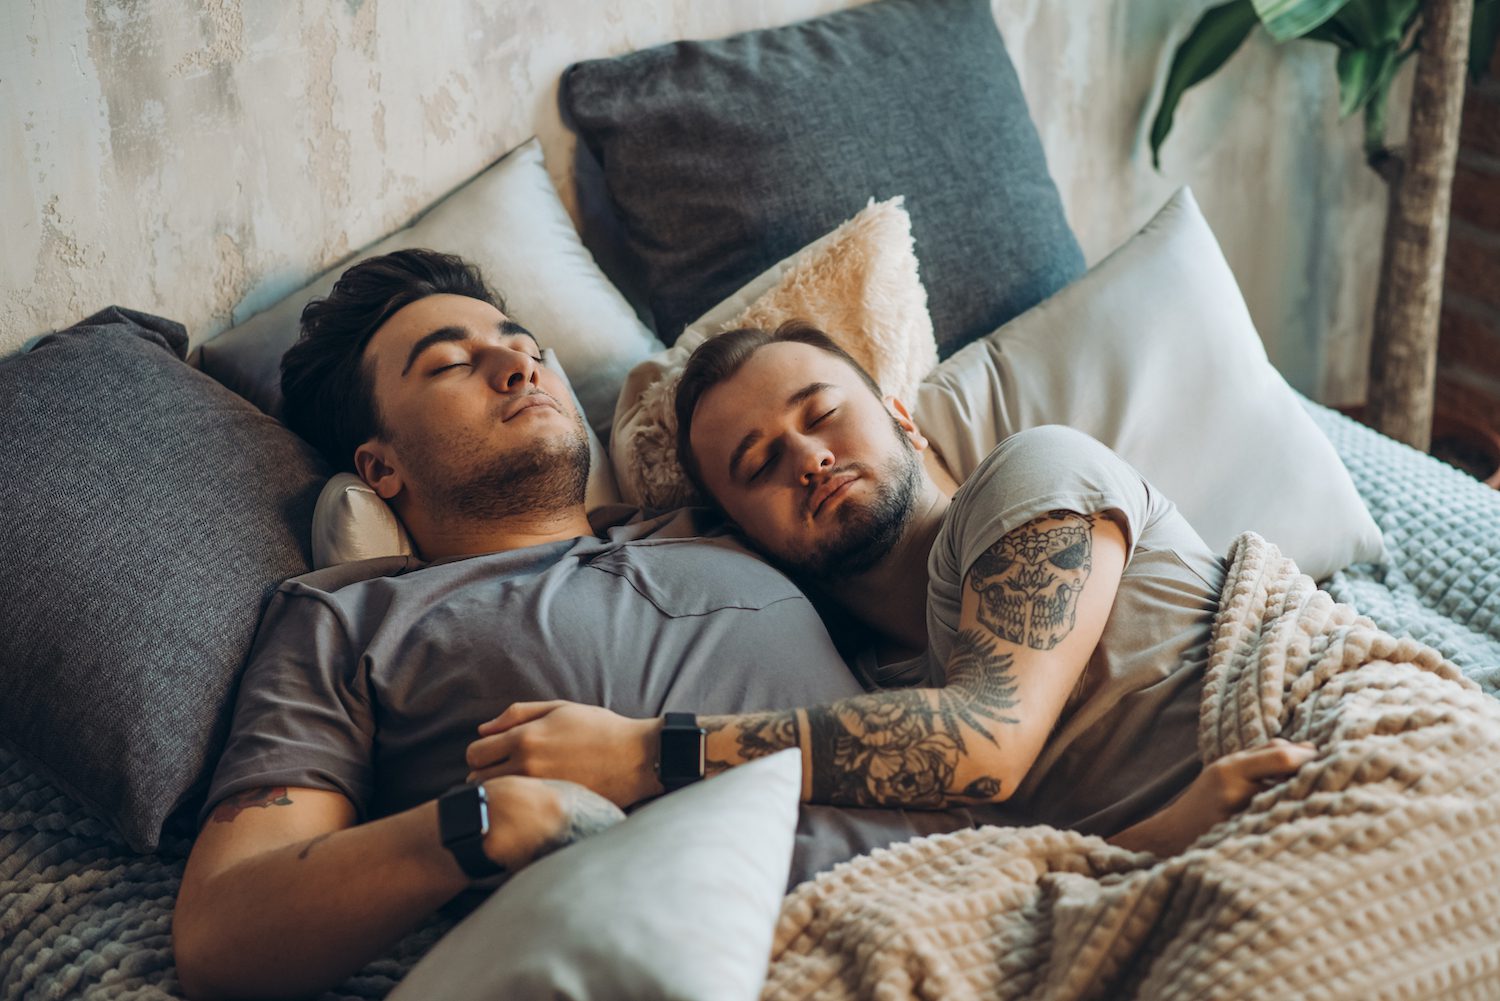 Sleeping Couole Sex Videos - Common Couple Sleeping Positions and What They Mean | Sleep Foundation